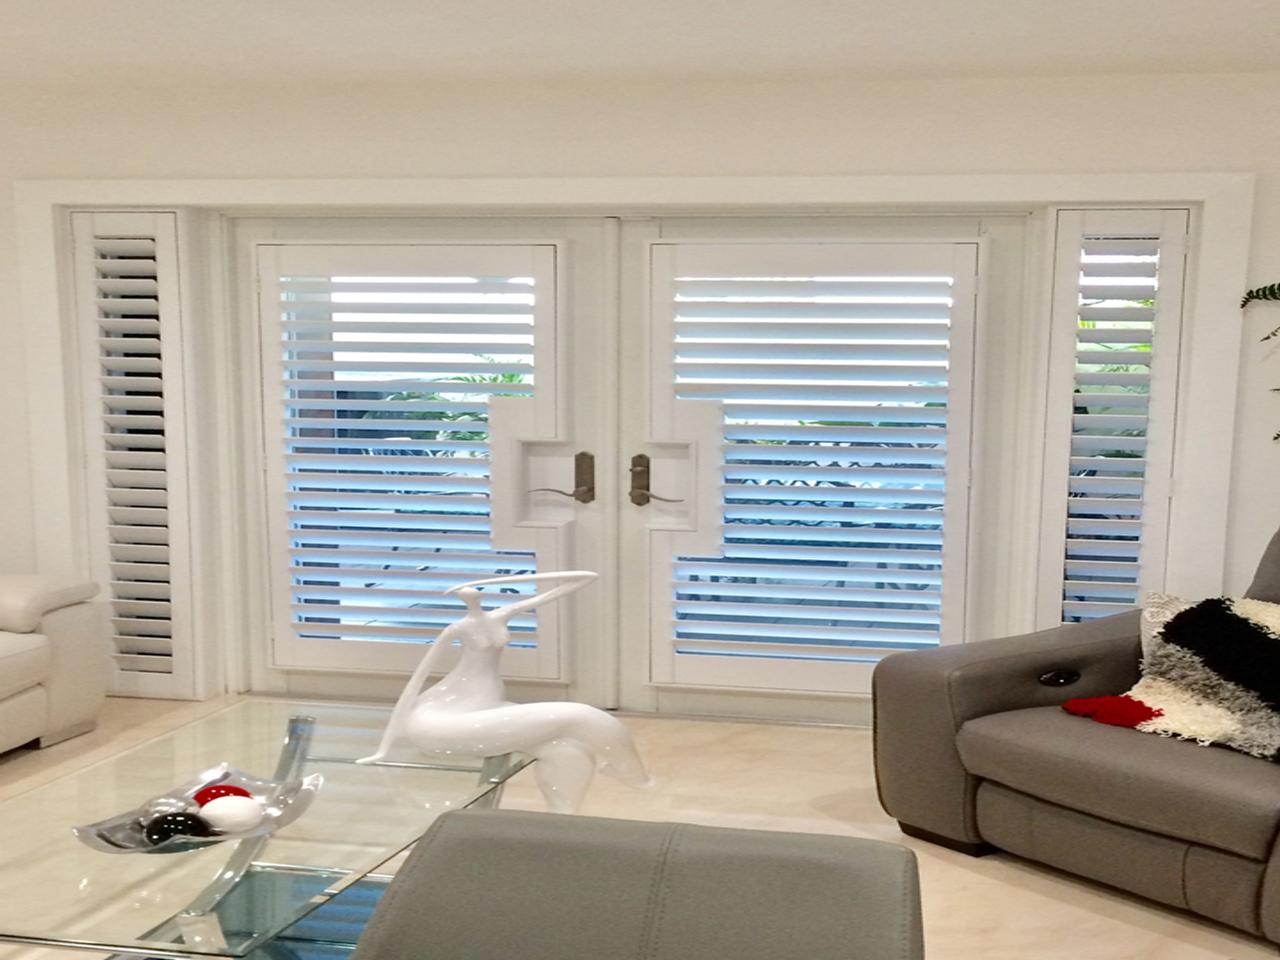 Contemporary room with plantation shutters on French doors with sidelights